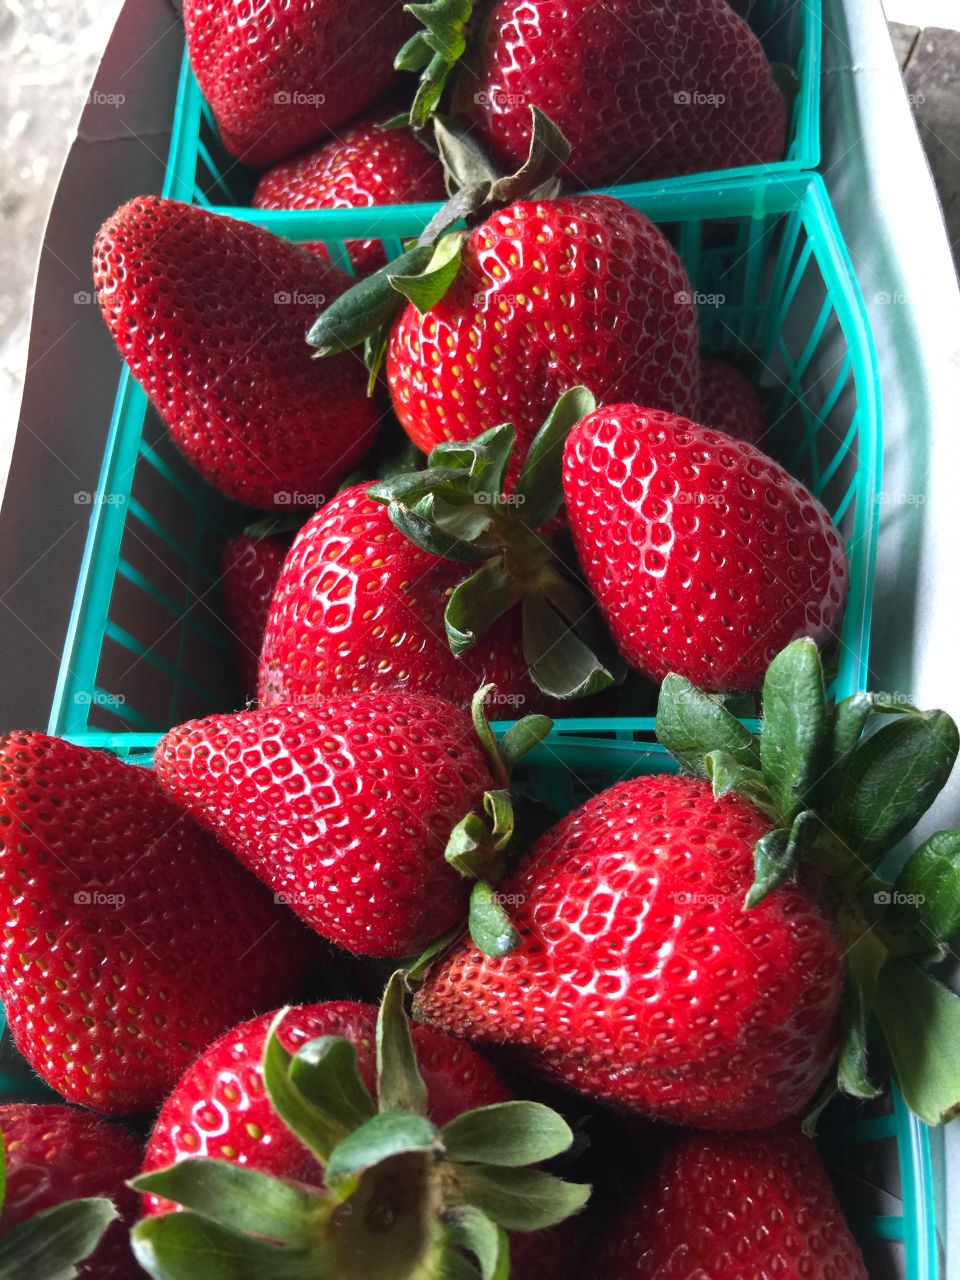 Organic strawberries from the farmers market